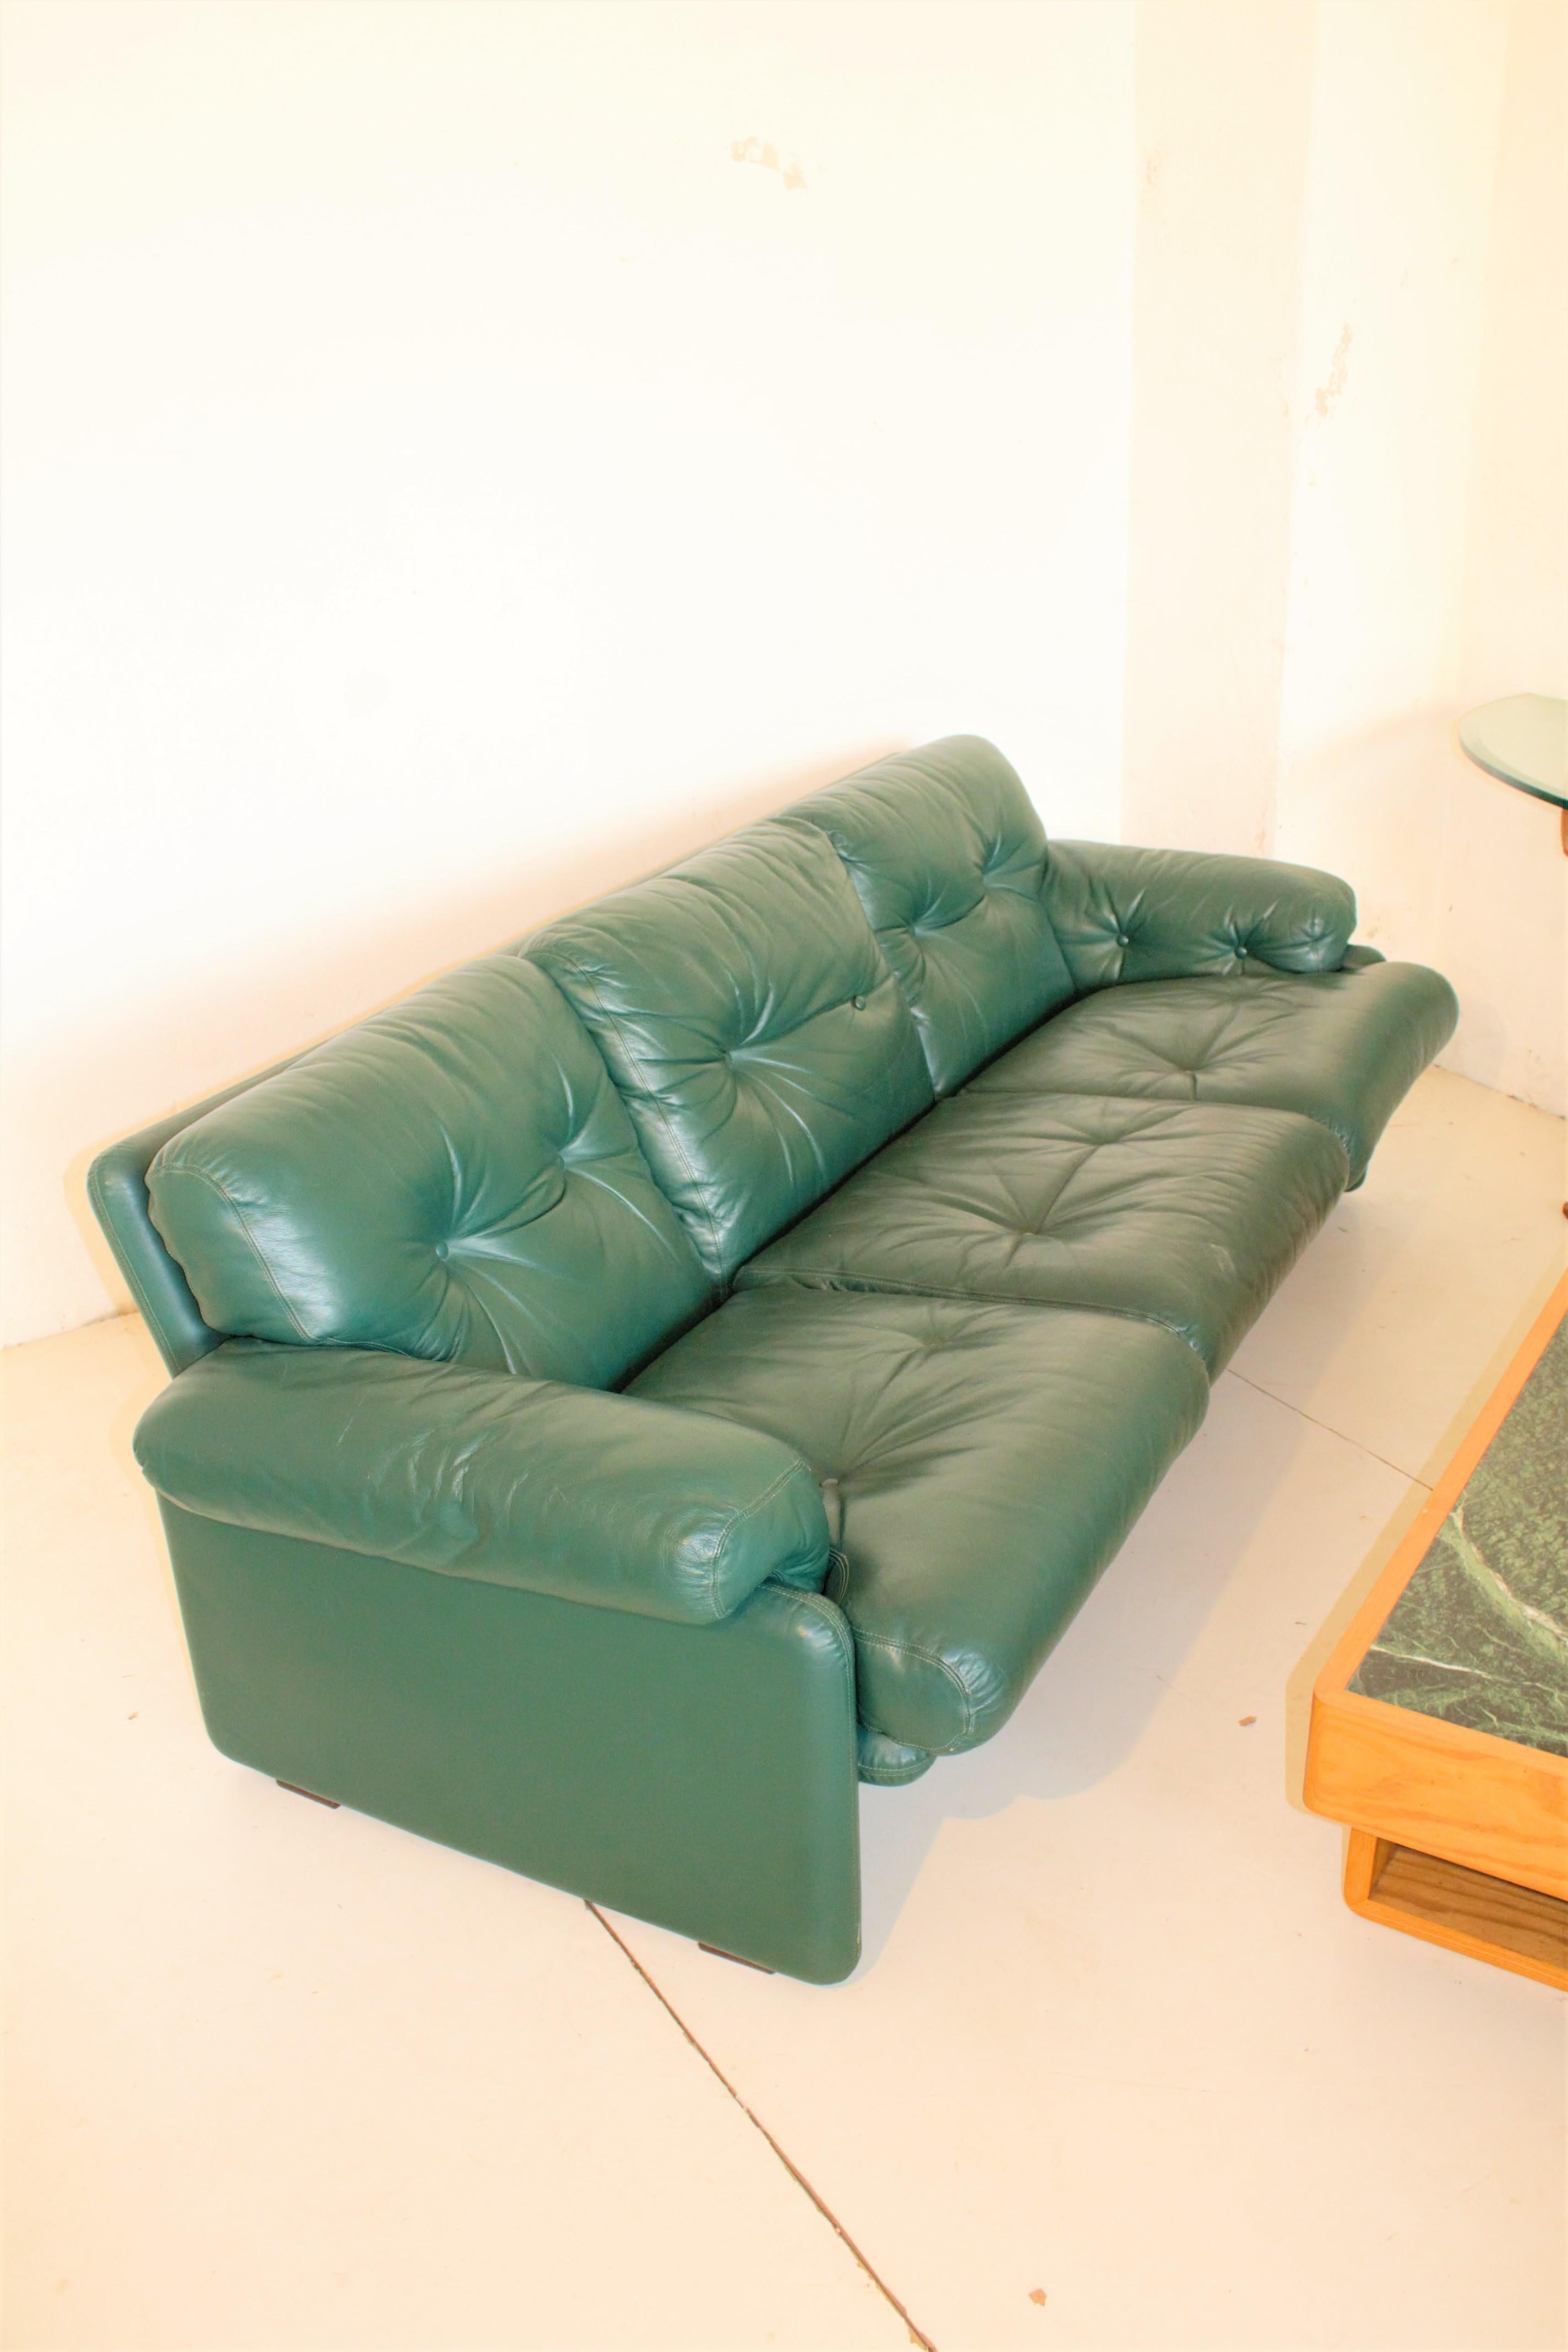 Very rare, inusual and trendy Coronado forest green leather sofa designed by Tobia Scarpa for B&B Italia. The project is dated 1966 but this sofa was made probably in the late 80's. 
 Very good condition.

Buttons will be fixed before shipping.
 